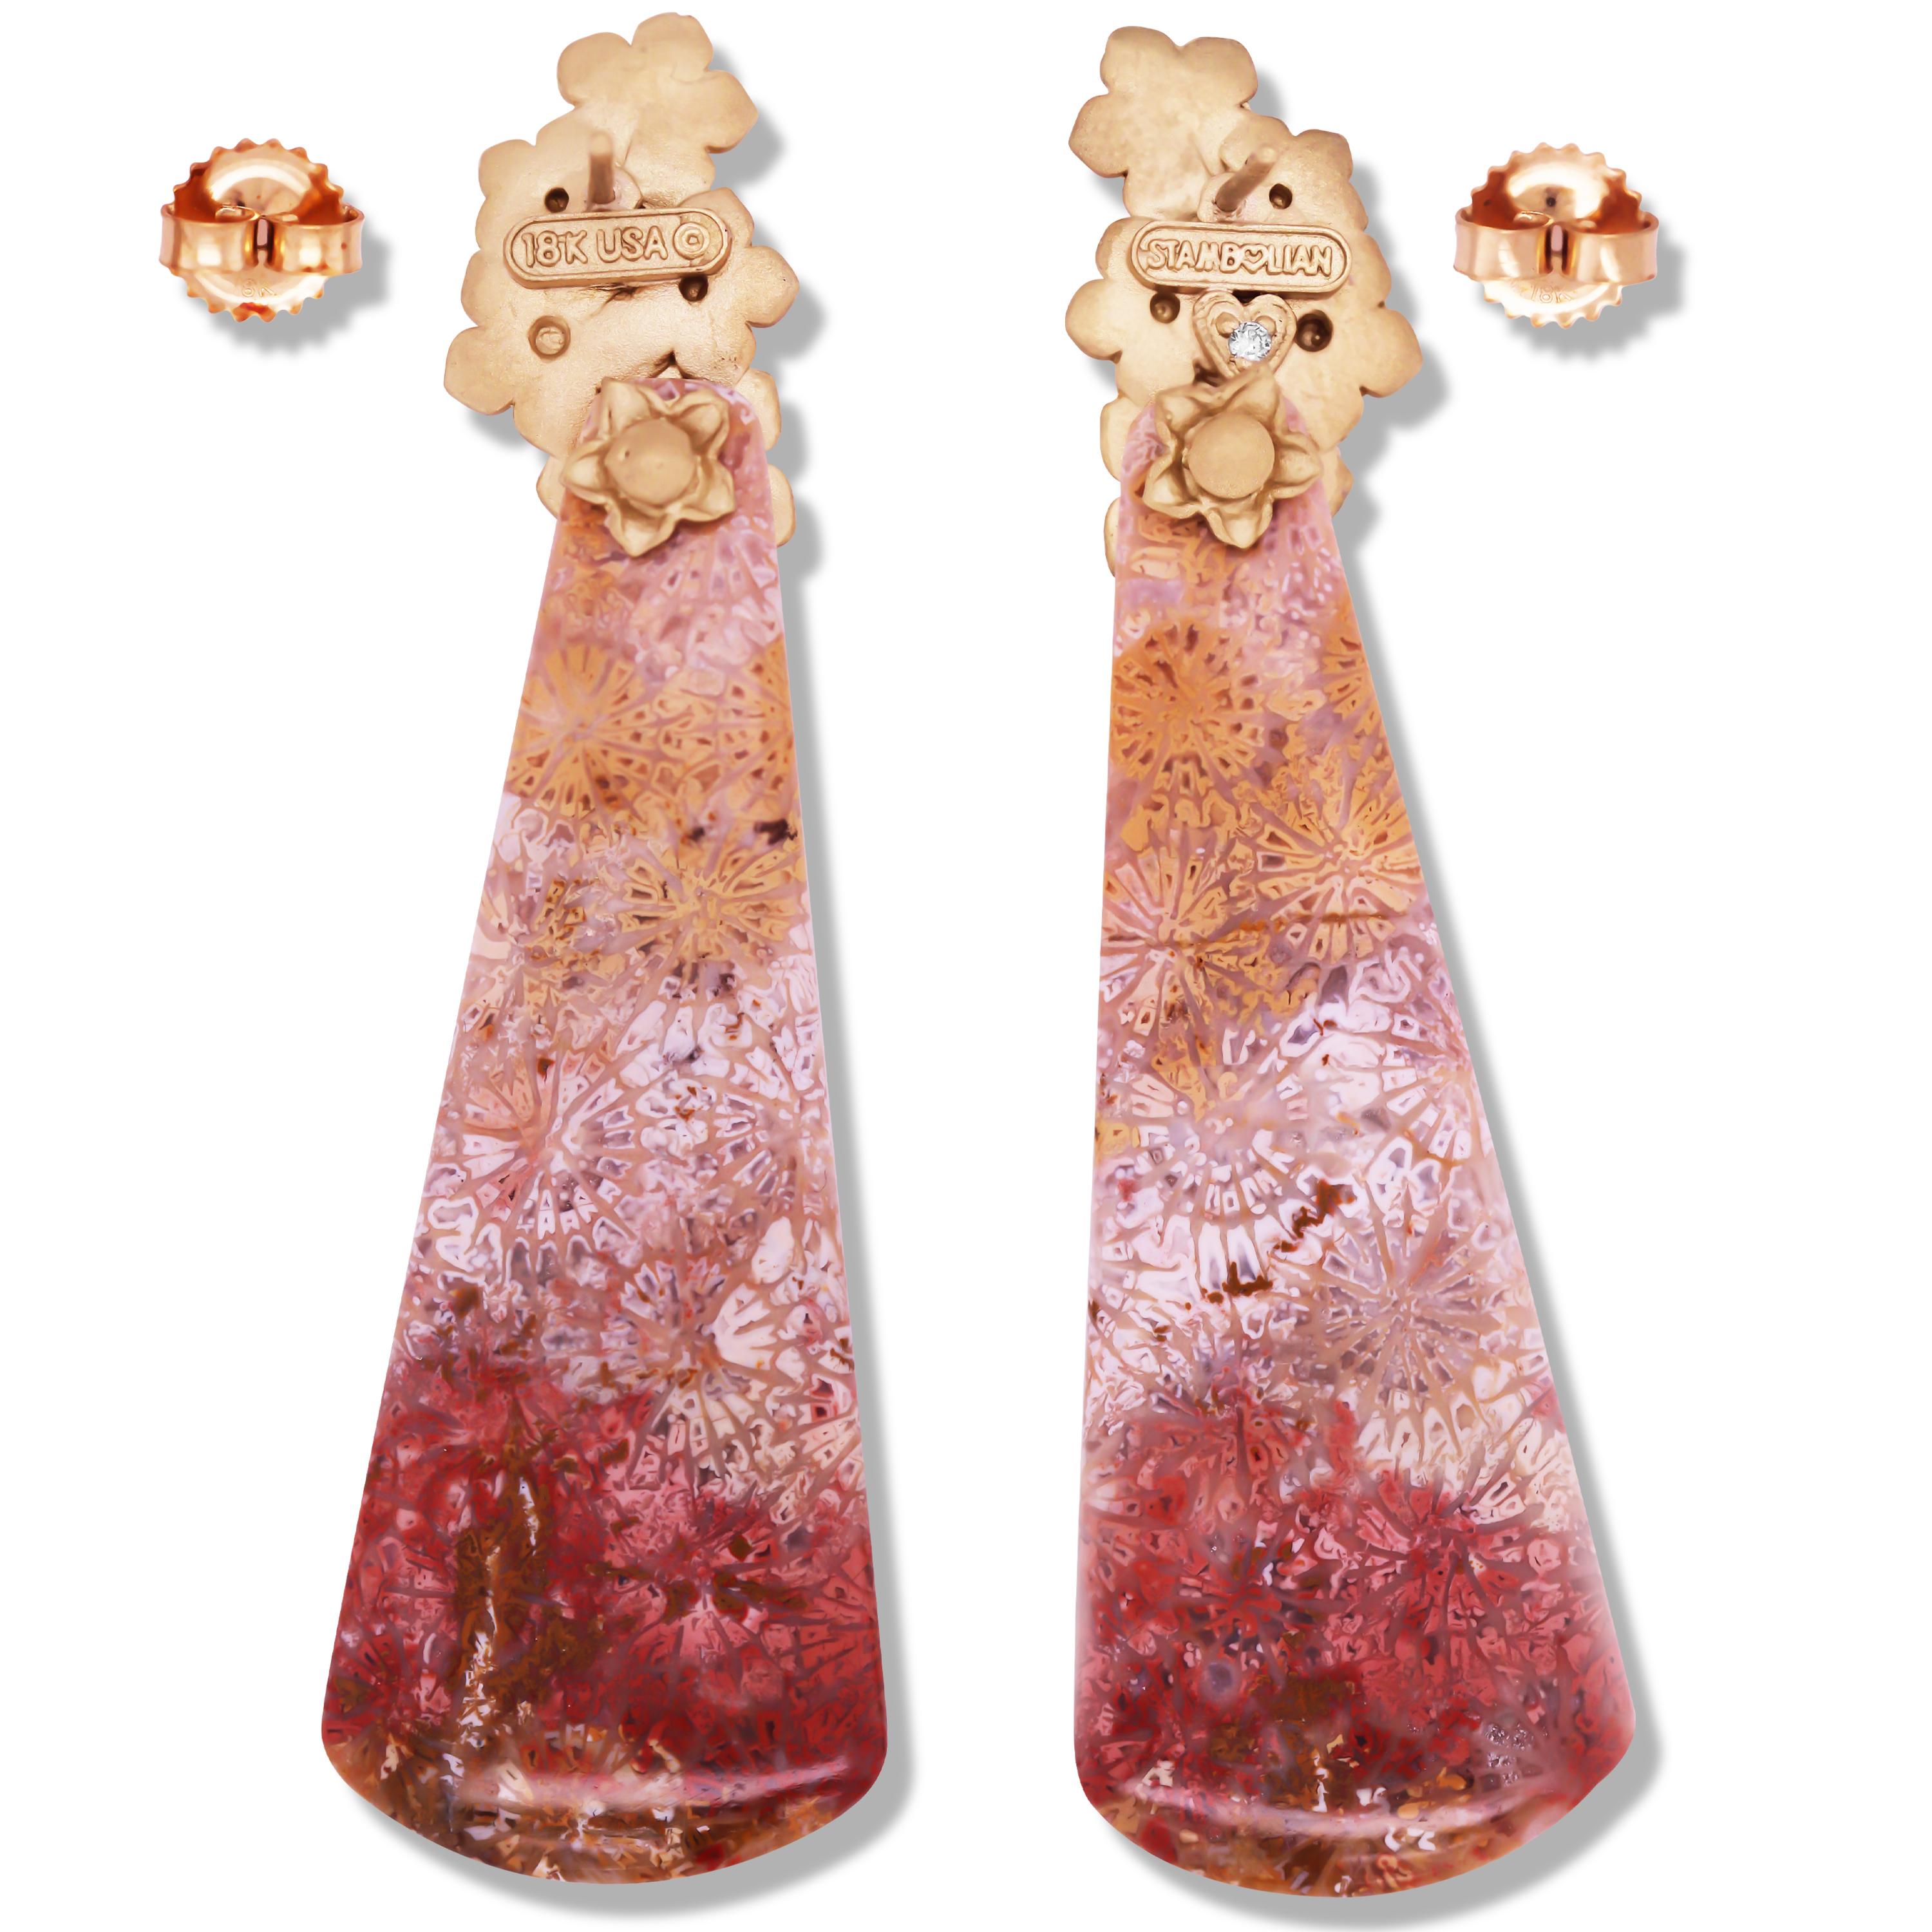 18K Yellow Gold and Diamond Floral Drop Earrings with Fossil Corals by Stambolian

This one-of-a-kind earrings by Stambolian is the finest example of natures beauty. These Fossil Corals are entirely natural and feature such incredible and natural